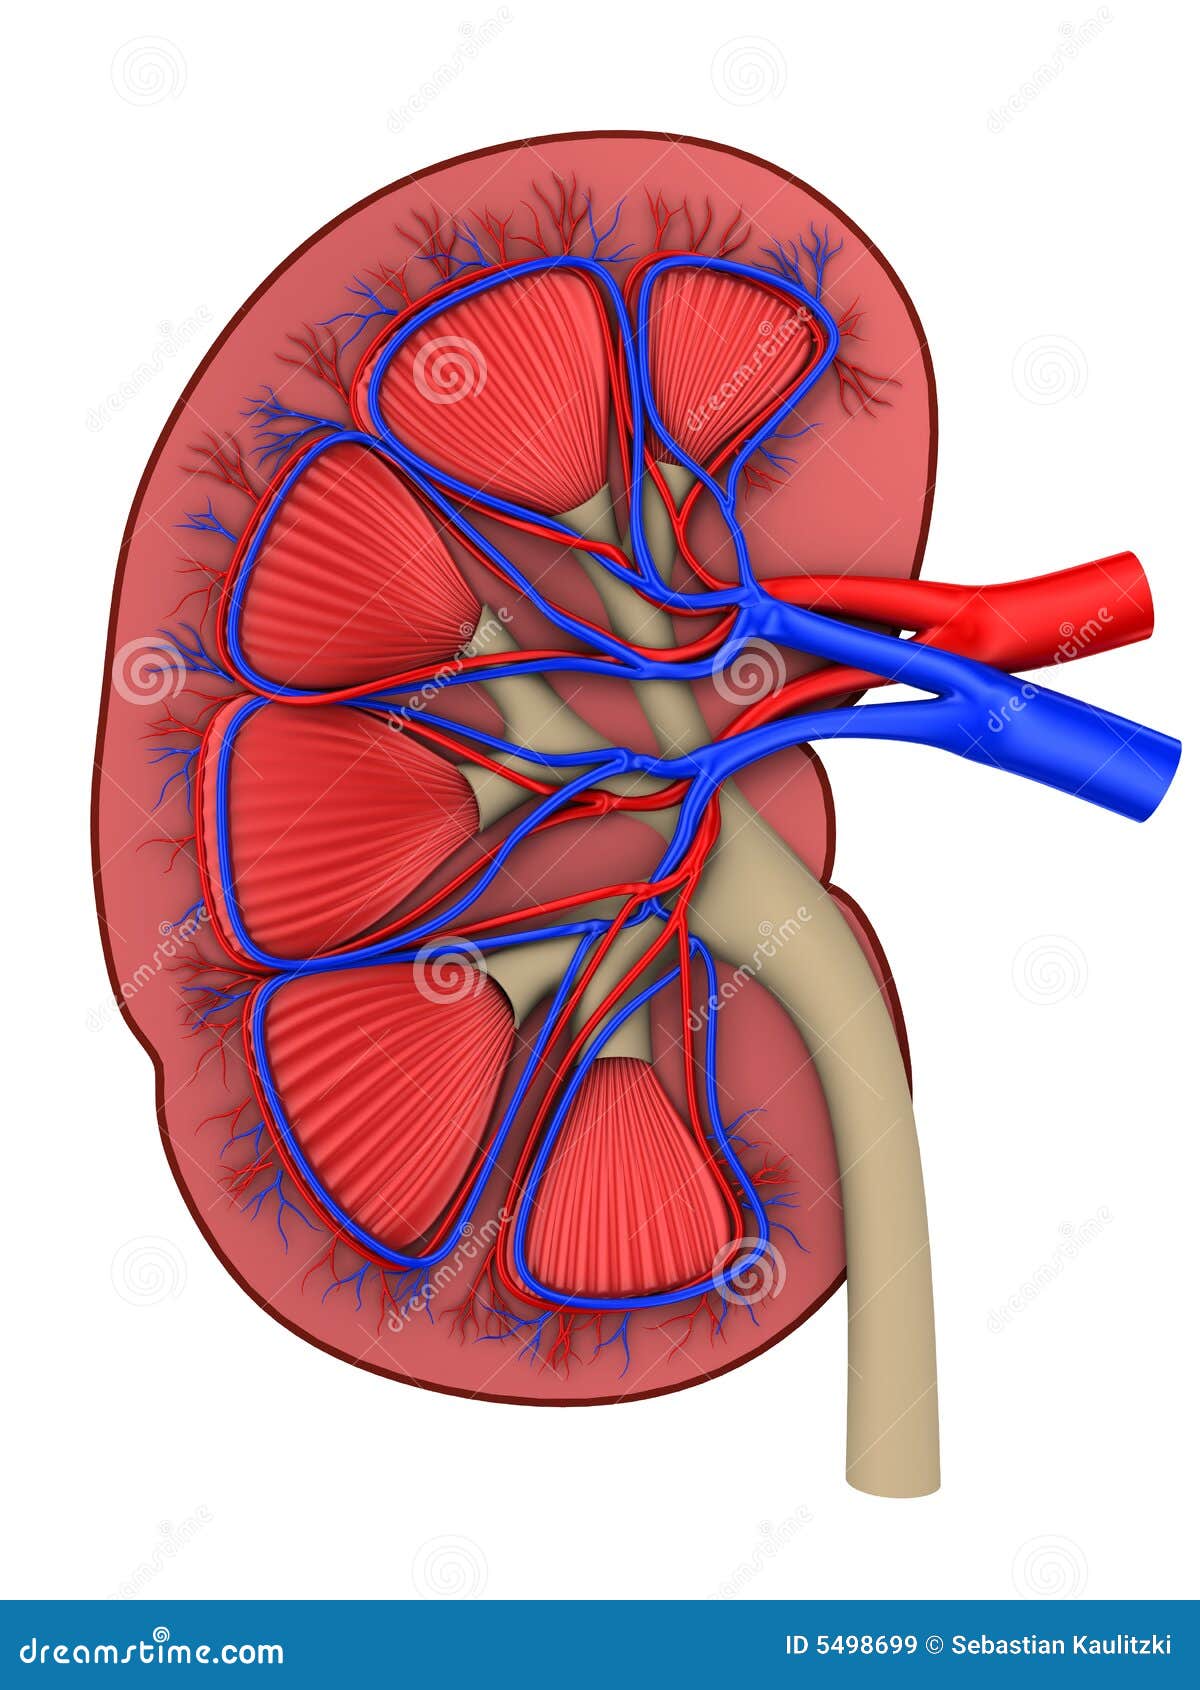 Draw a Labeled Diagram of the Human Kidney as Seen in a Longitudinal  Section. - Biology | Shaalaa.com